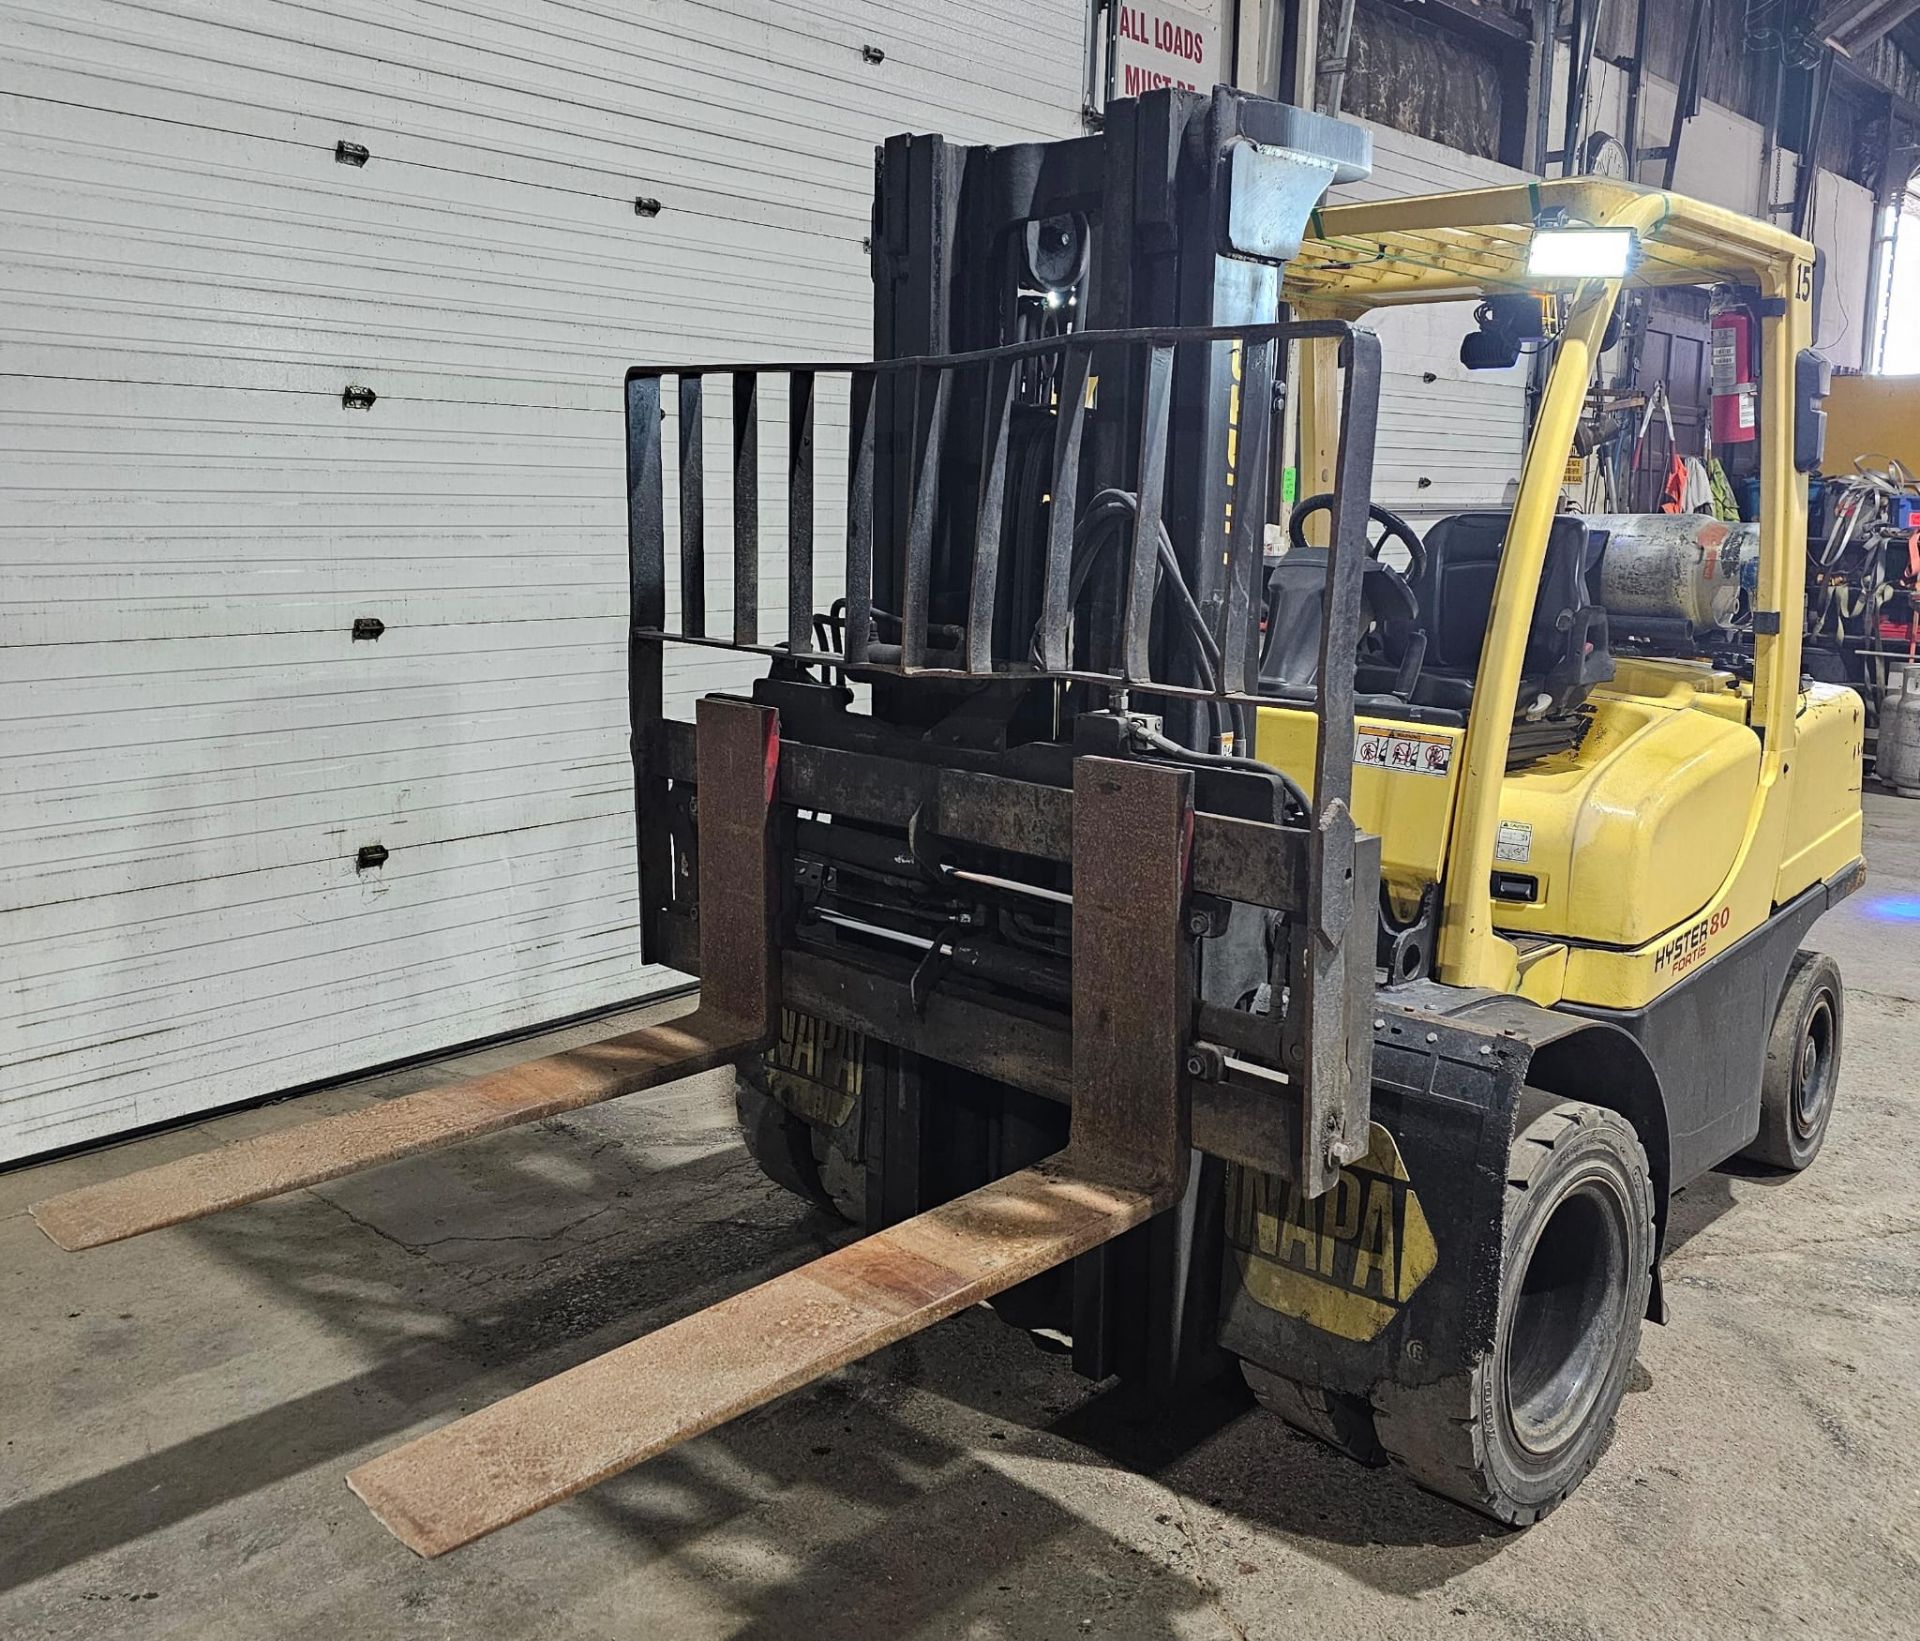 2011 Hyster 8,000 LPG (propane) Outdoor Forklift Dual Front Tires 3-Stage 182" load height Sideshift - Image 2 of 3